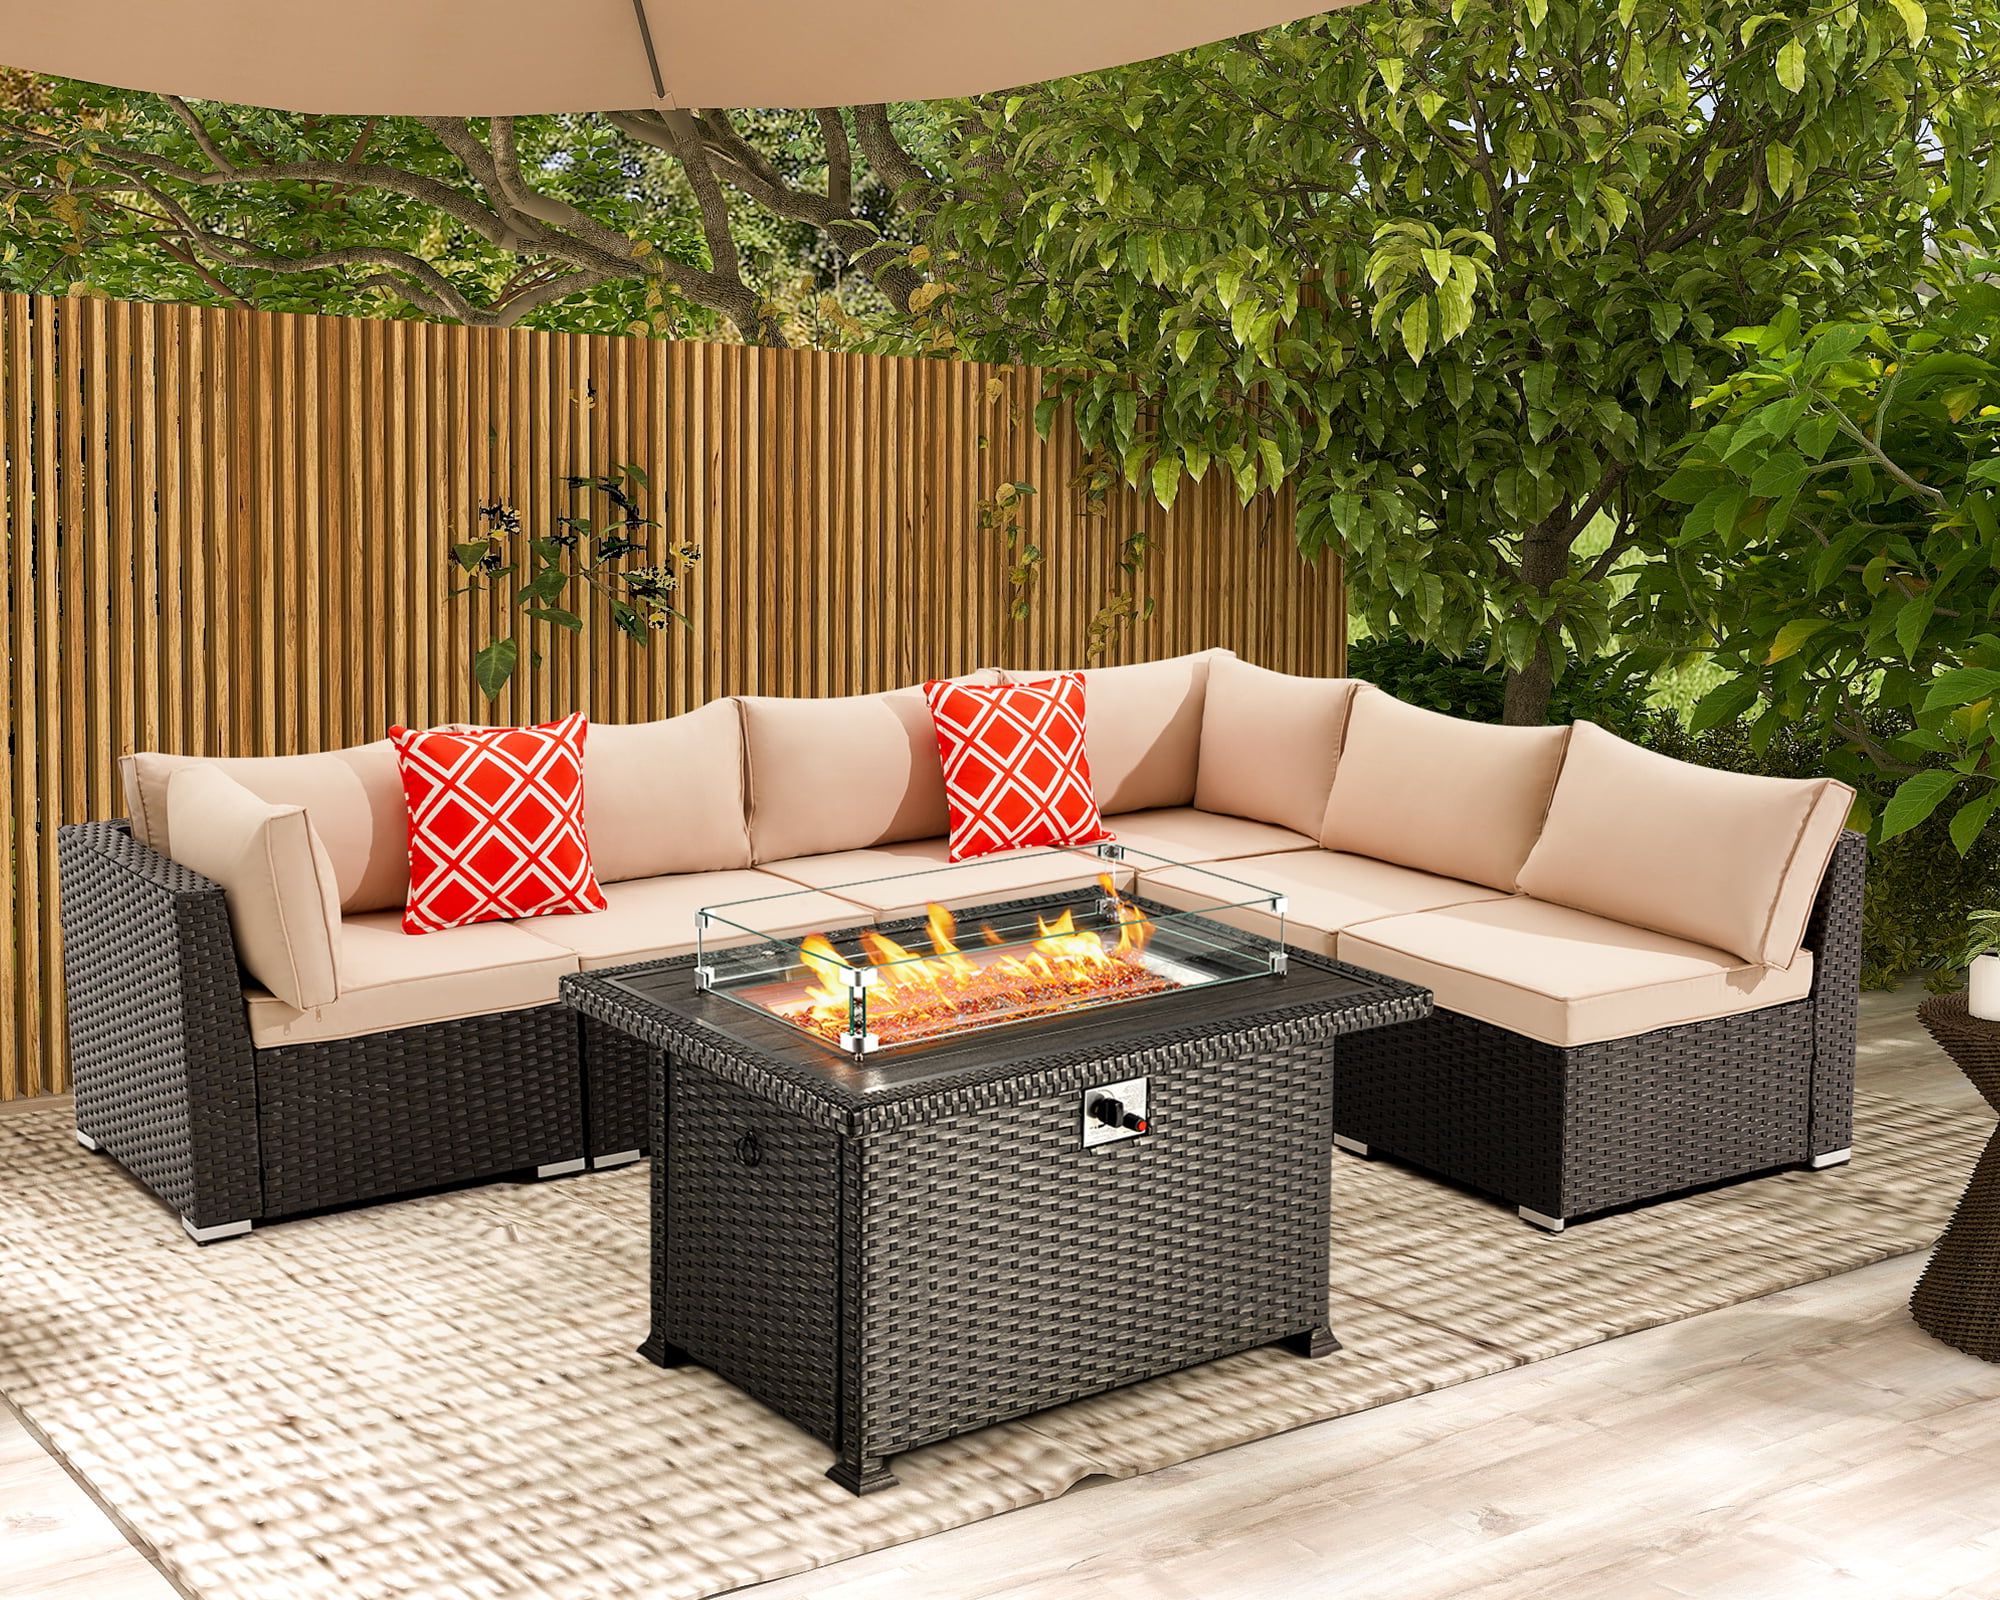 Fire Pit Table Wicker Sectional Sofa Set Pertaining To Current Hugiee 7 Pieces Patio Furniture Wicker Sofa Outdoor Sectional Sets With  44 Inch 50,000 Btu Gas Fire Pit Table Auto Ignition Propane Fire Pit Table,  Khaki – Walmart (View 2 of 15)